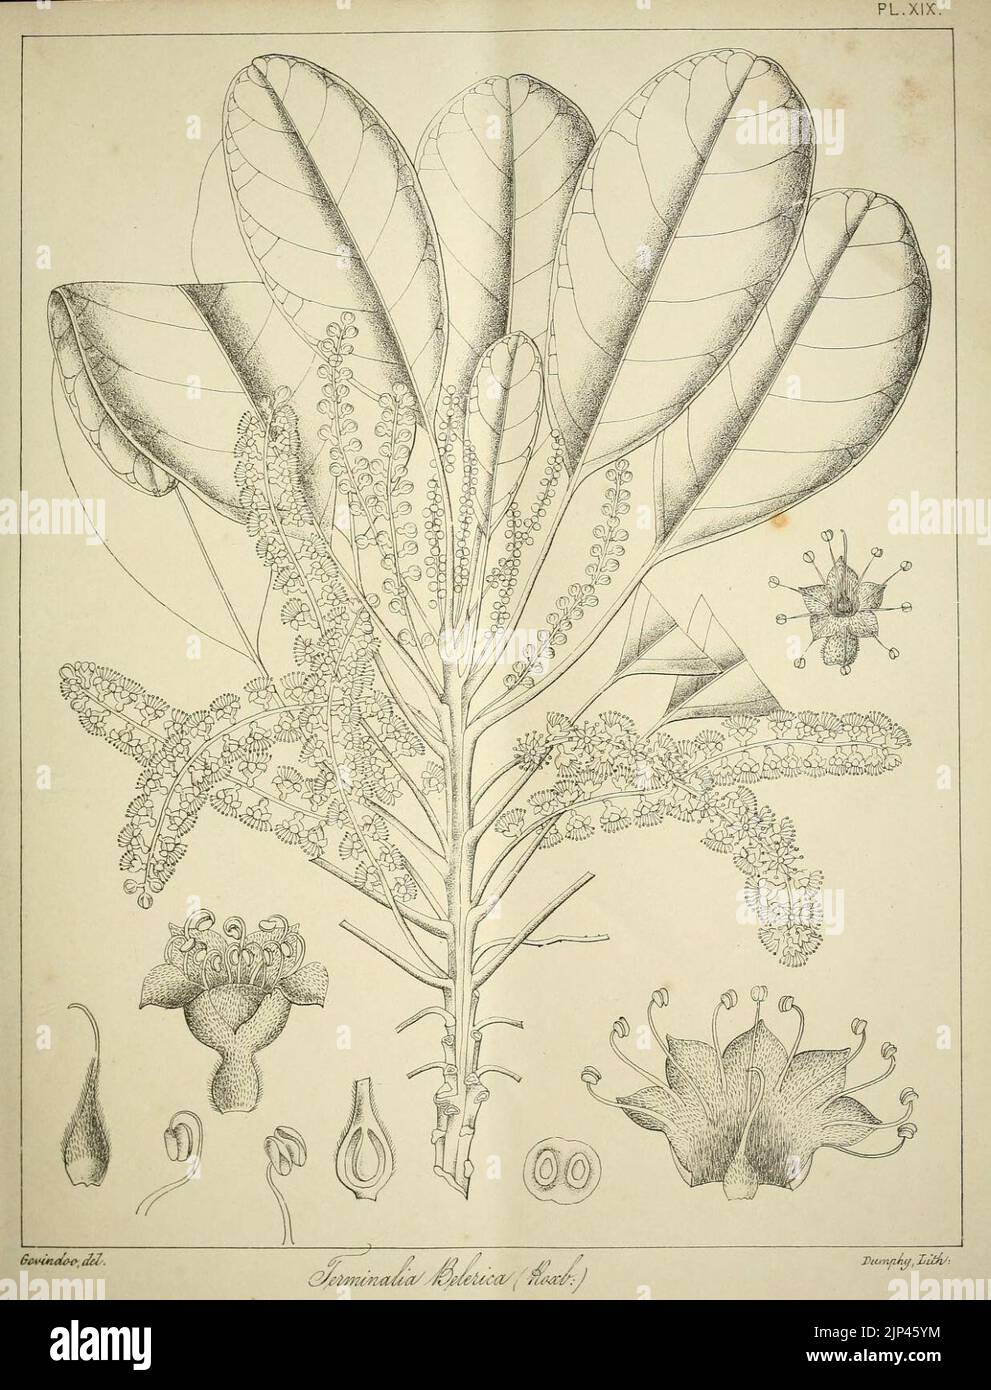 The flora sylvatica for southern India (Pl. XIX) (6820652220) Stock Photo